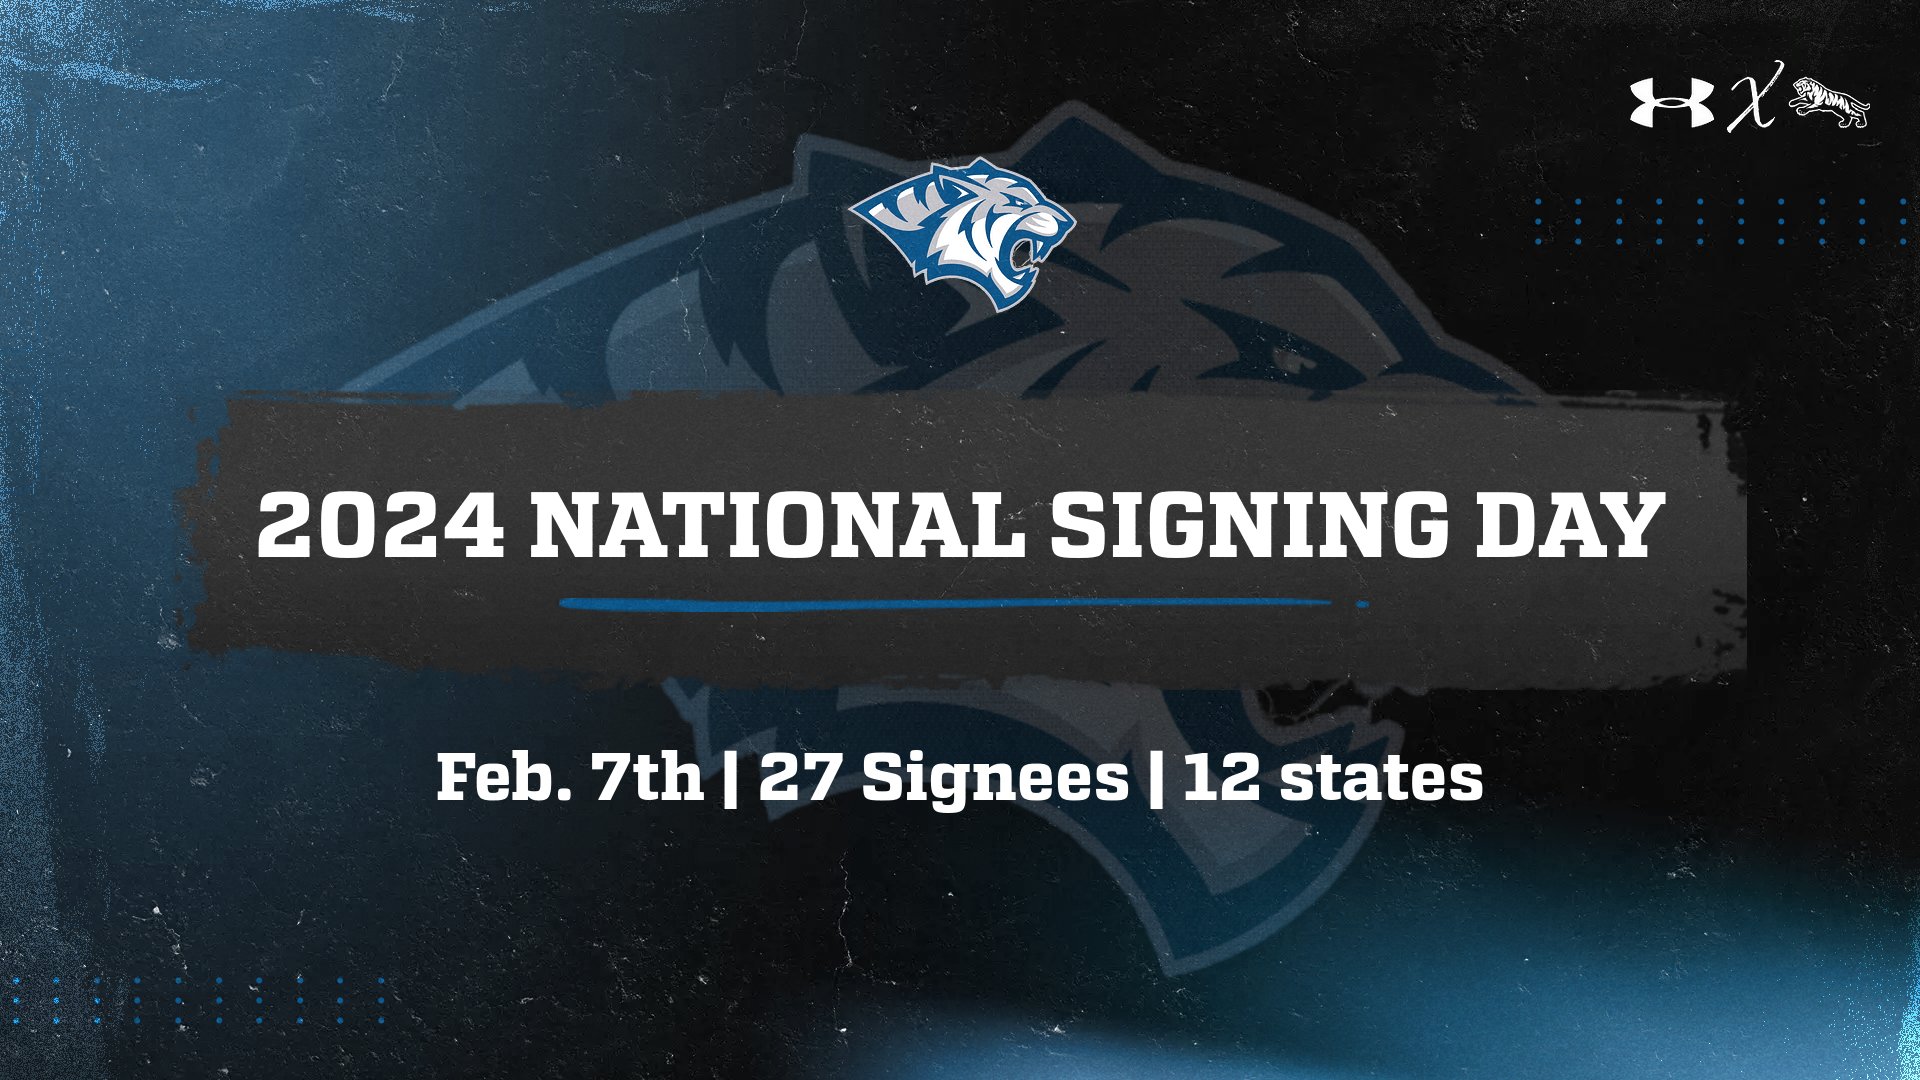 TIGER FOOTBALL INKS 27 SIGNEES ON NATIONAL SIGNING DAY